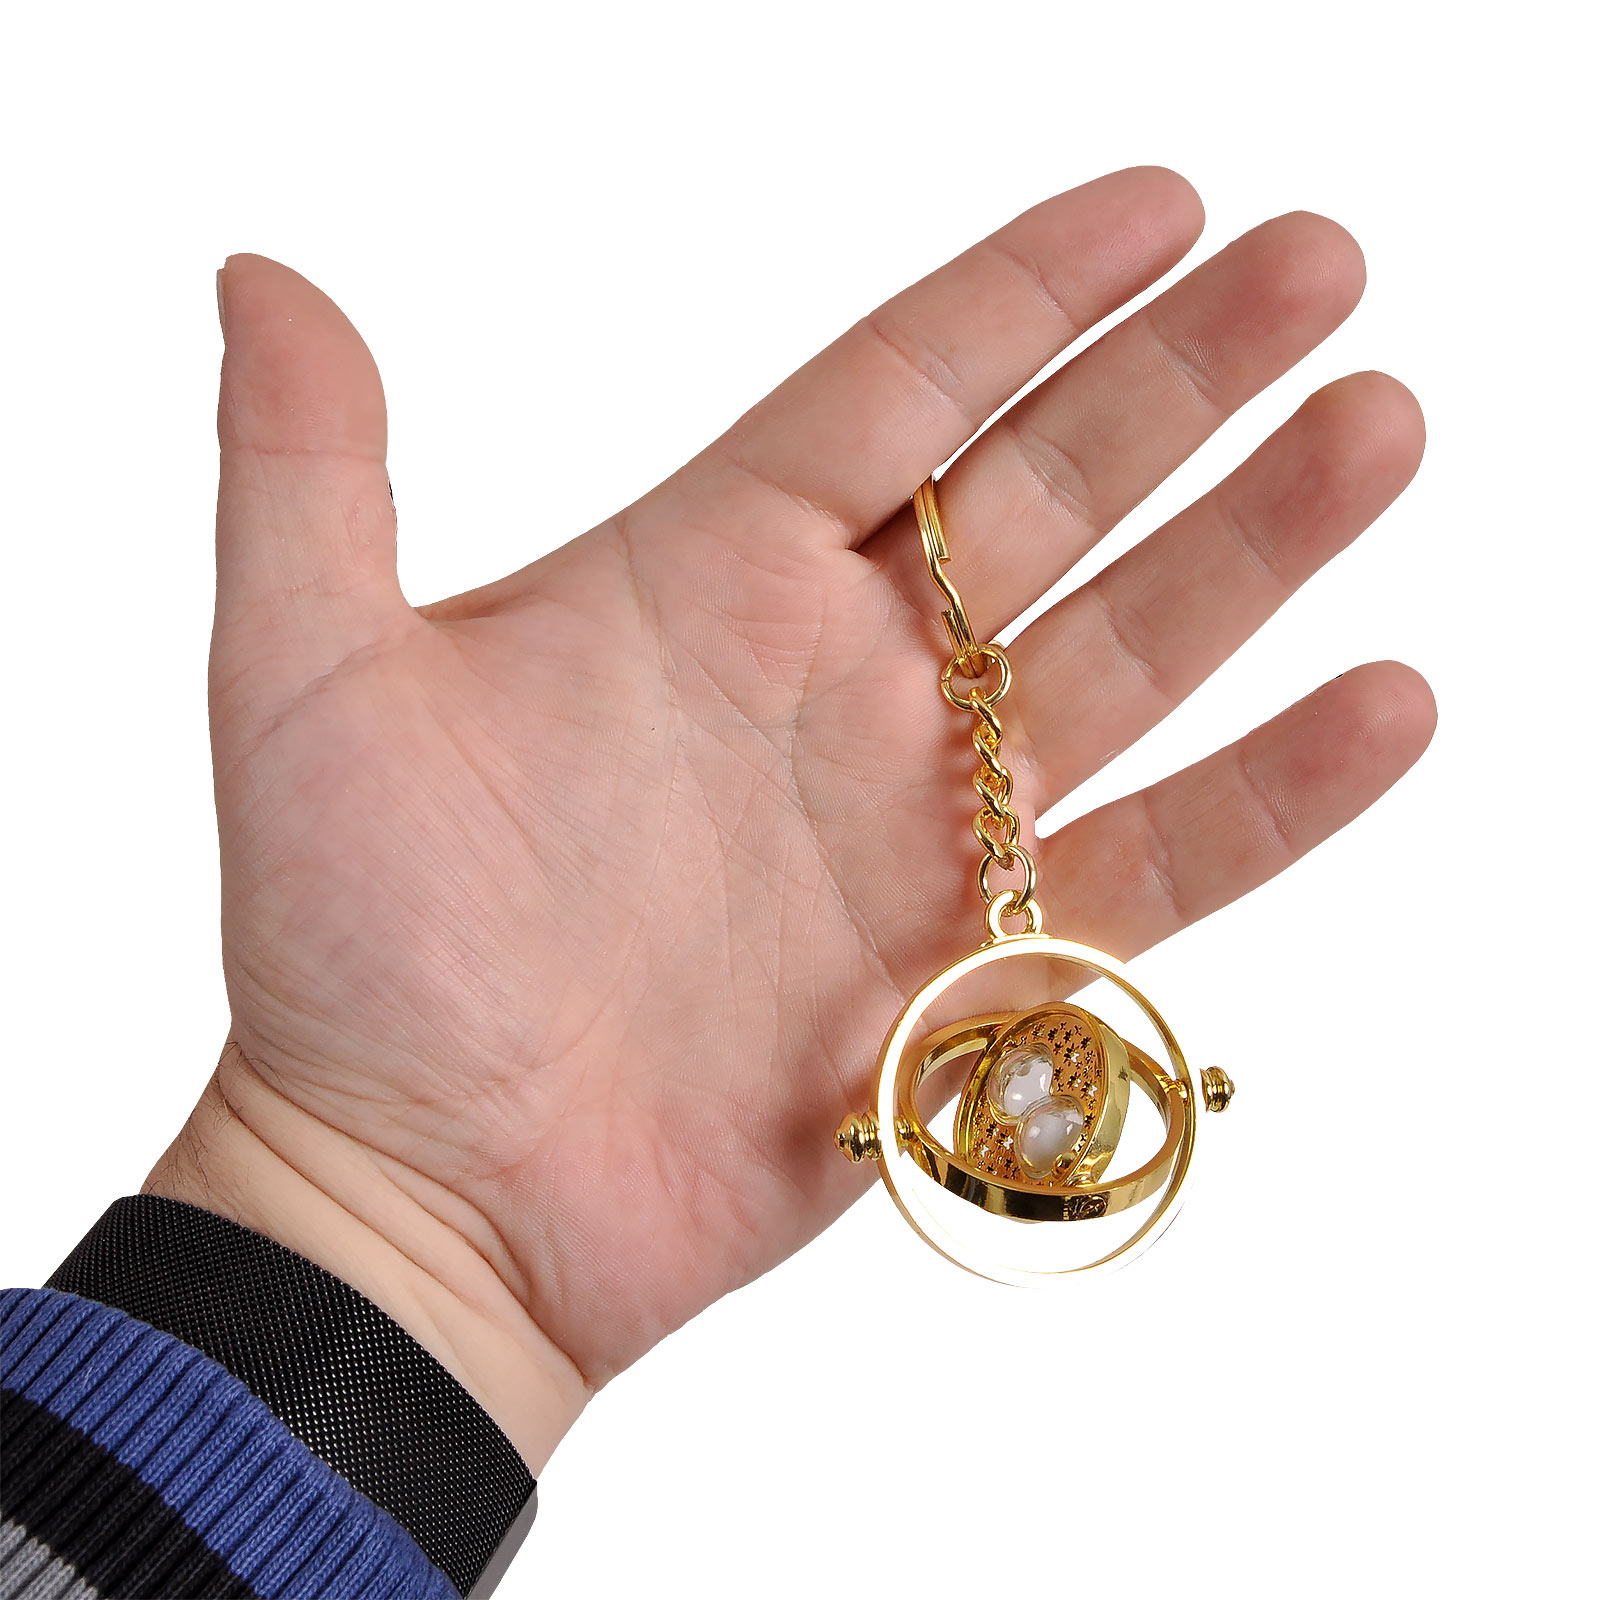 Hermione's Time Turner Keychain - Harry Potter